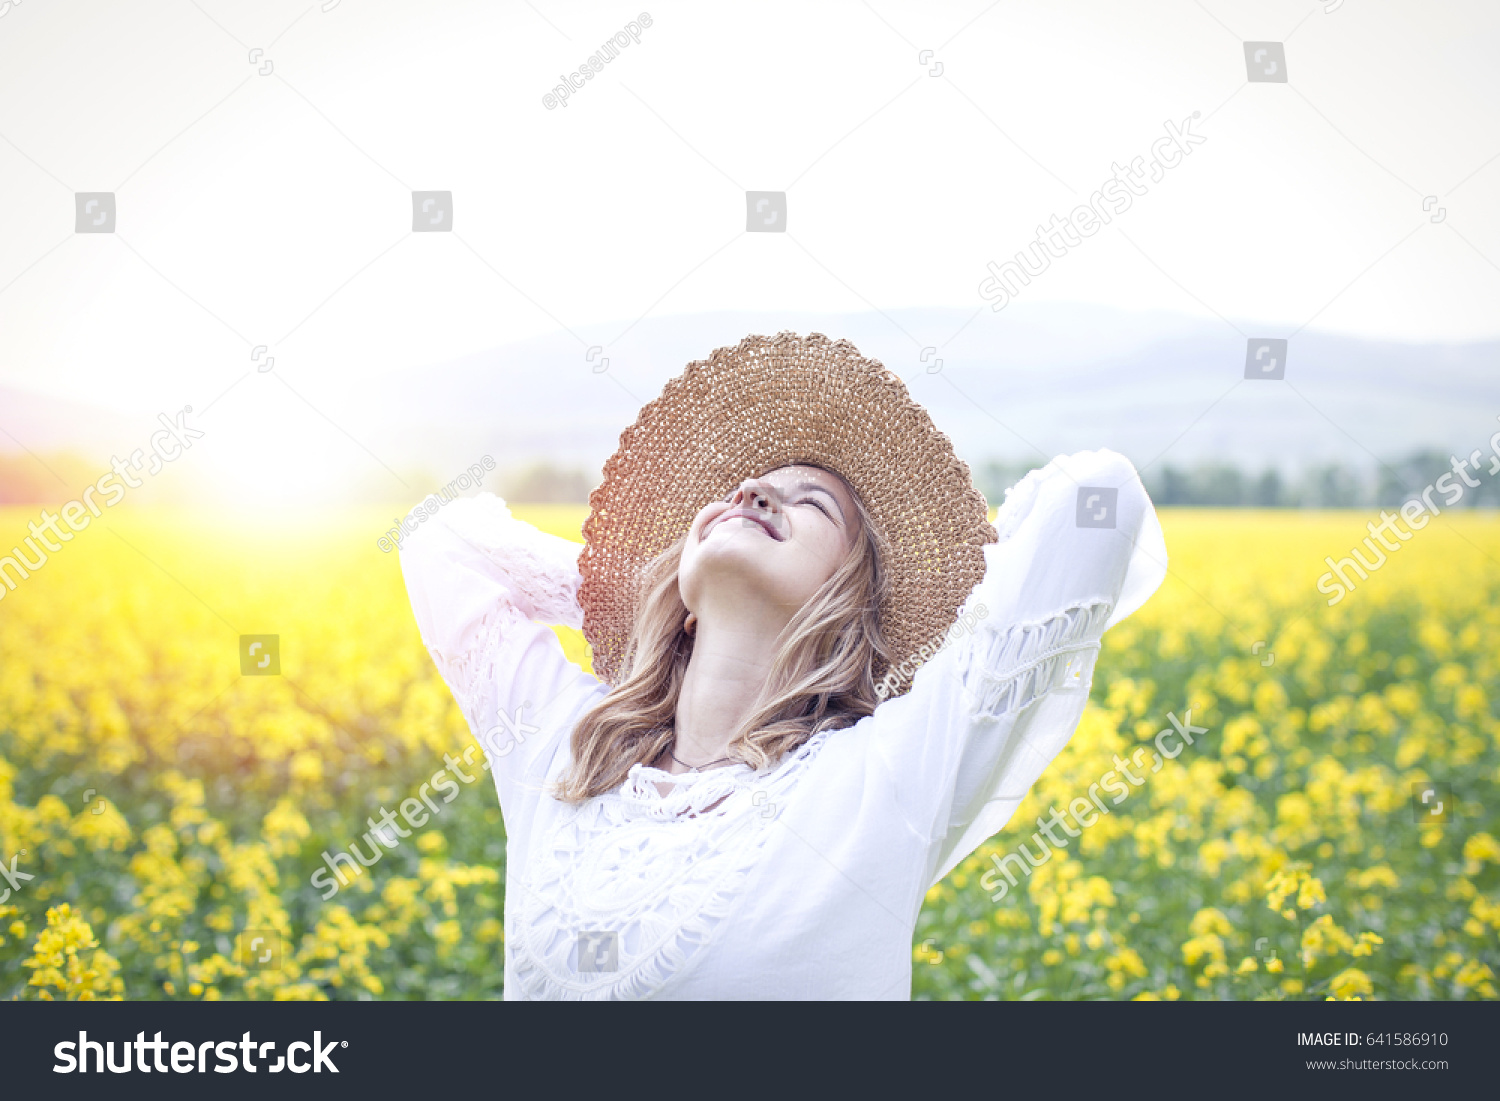 young woman in a rapeseed field #641586910